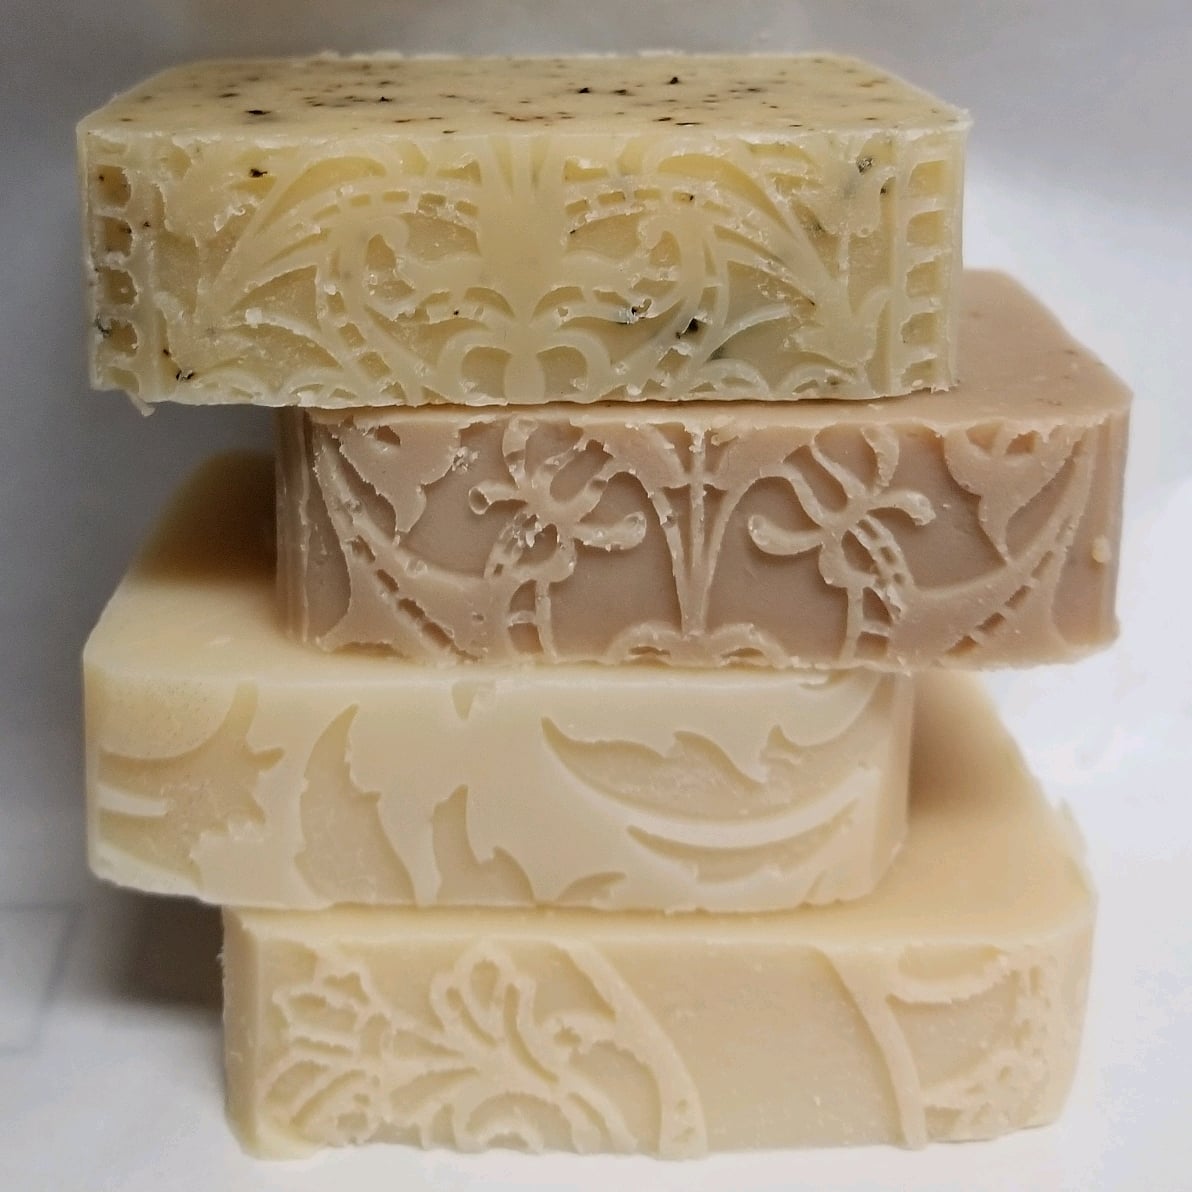 Choice of 4 Goat Milk Soaps, Ready to ship